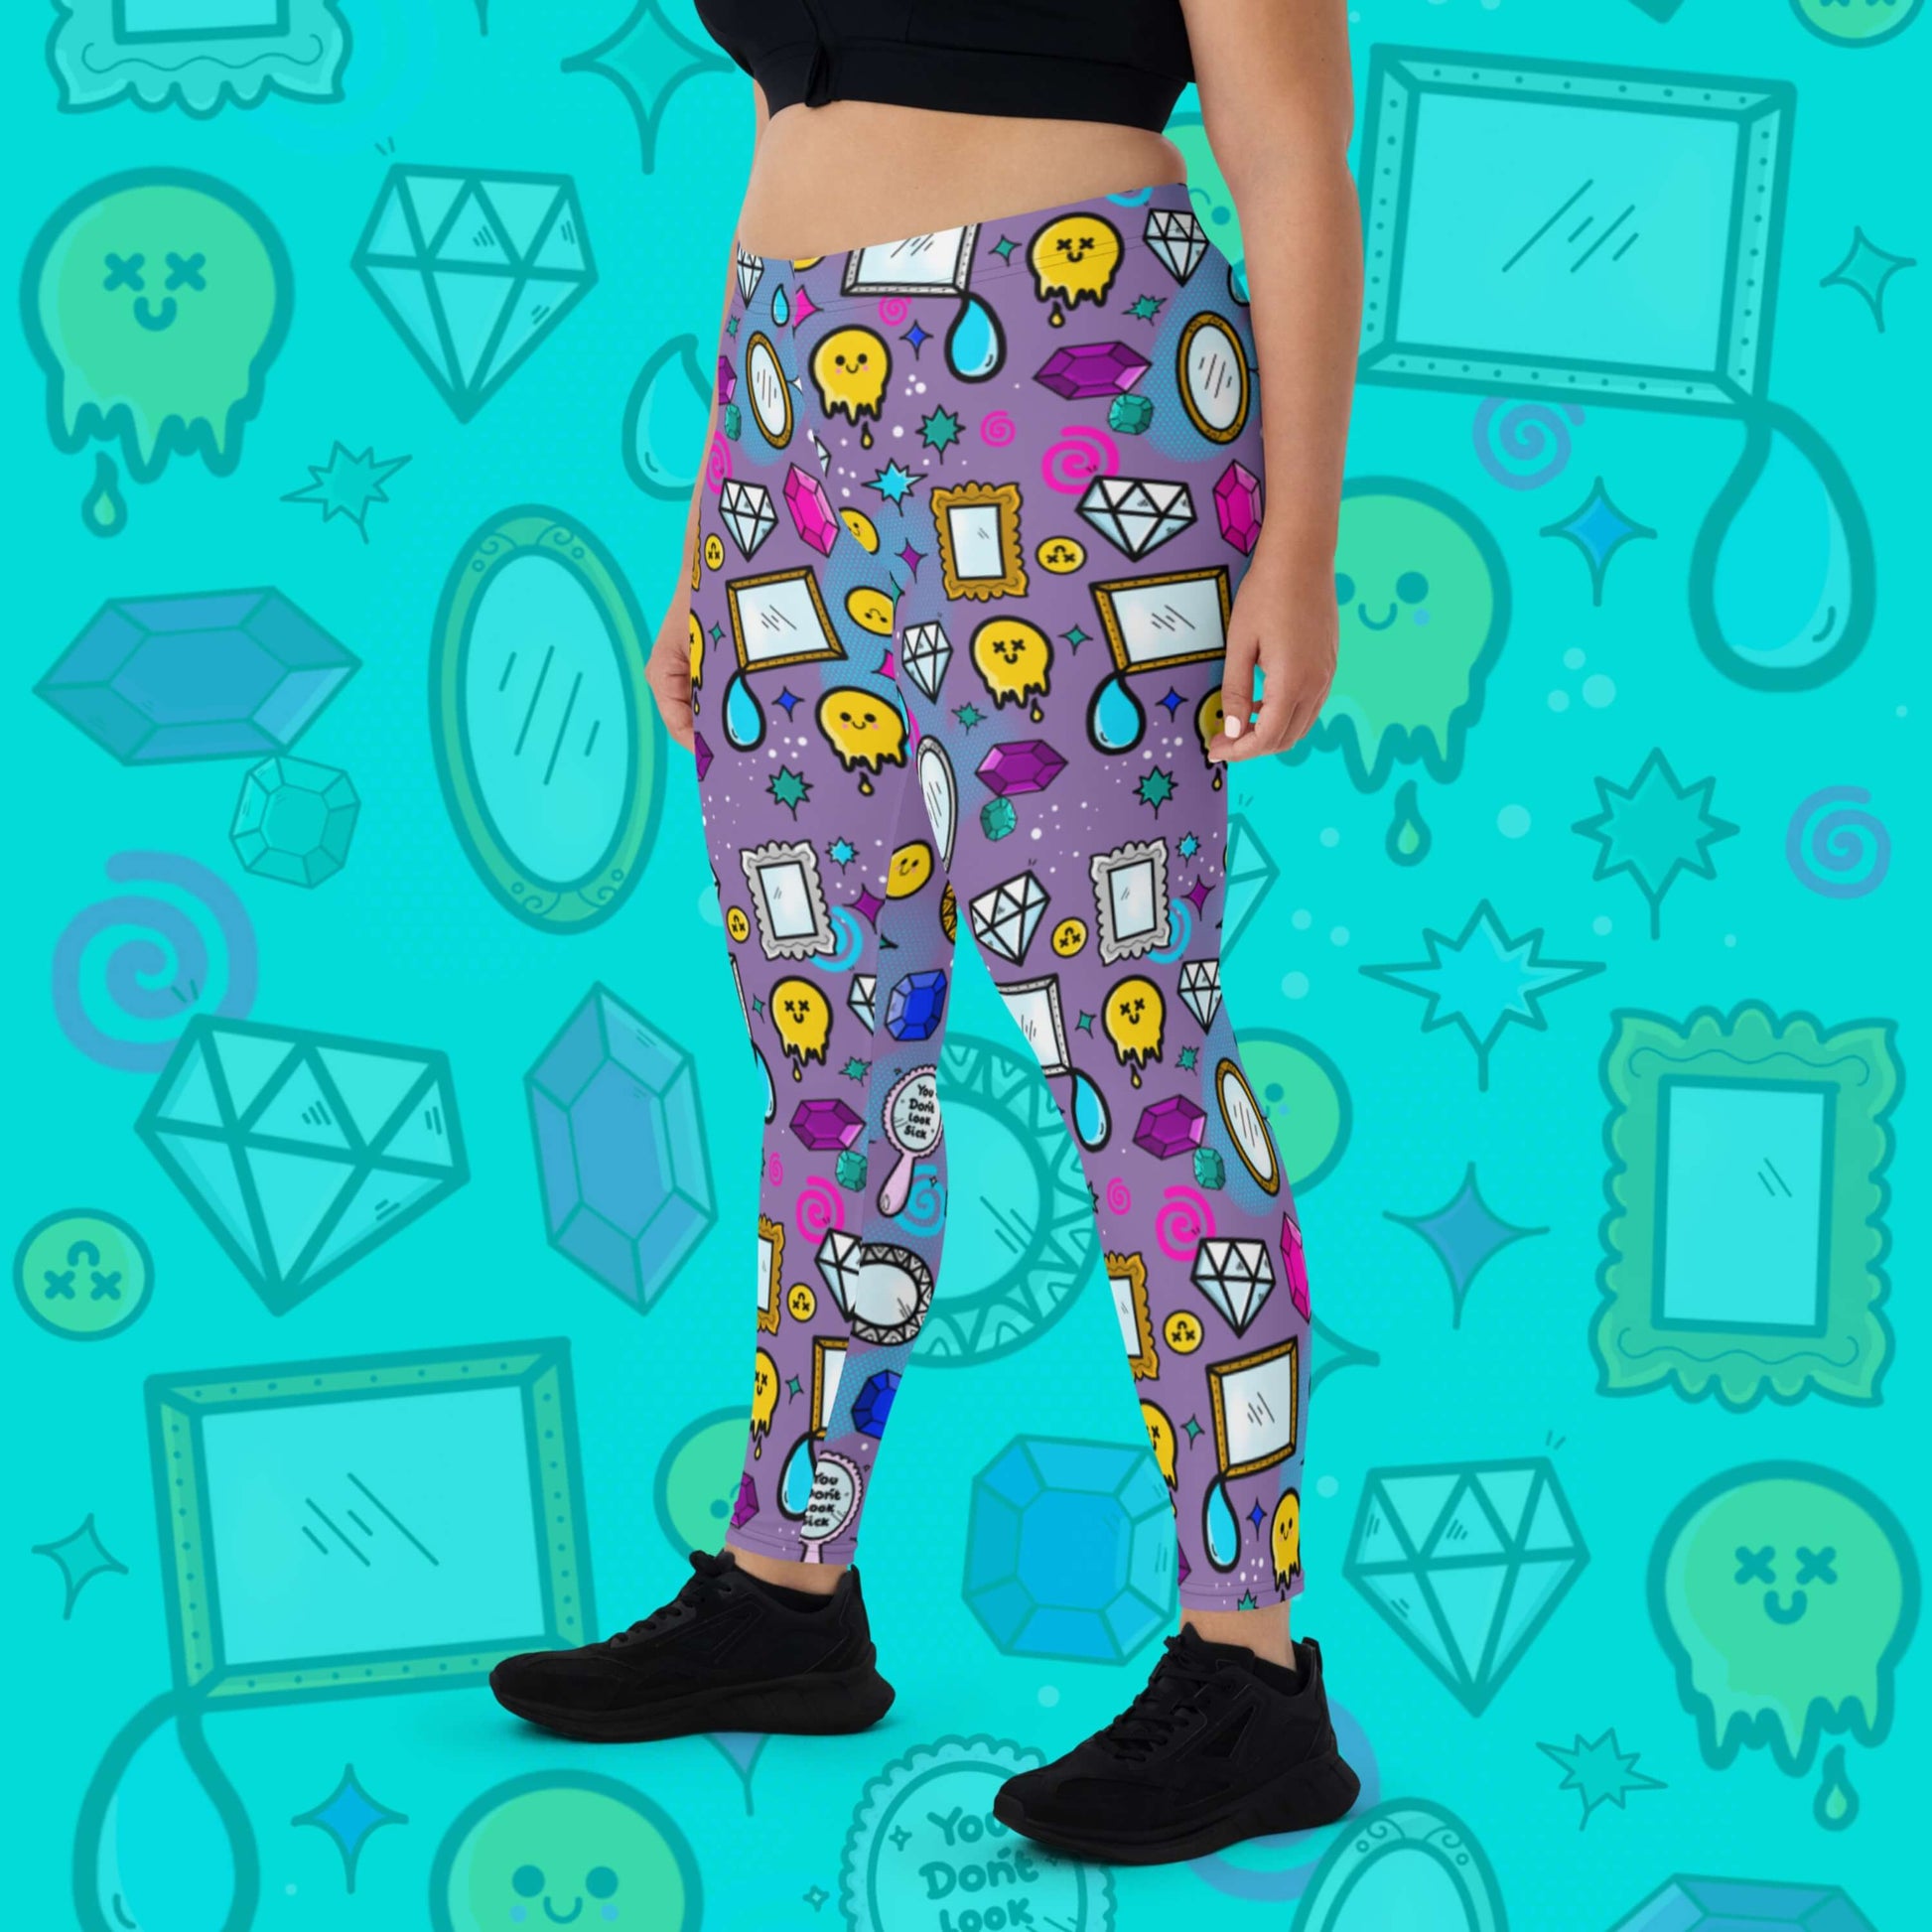 The You Don't Look Sick Leggings modelled by a femme person facing left with a black tshirt and black trainers on a blue background with a faded version of the print. The purple base leggings features melting yellow smiley faces, mirrors, gemstones, teardrops, sparkles, swirls and dots with a centre hand held mirror reading 'you don't look sick'. The hand drawn design is raising awareness for invisible illnesses.